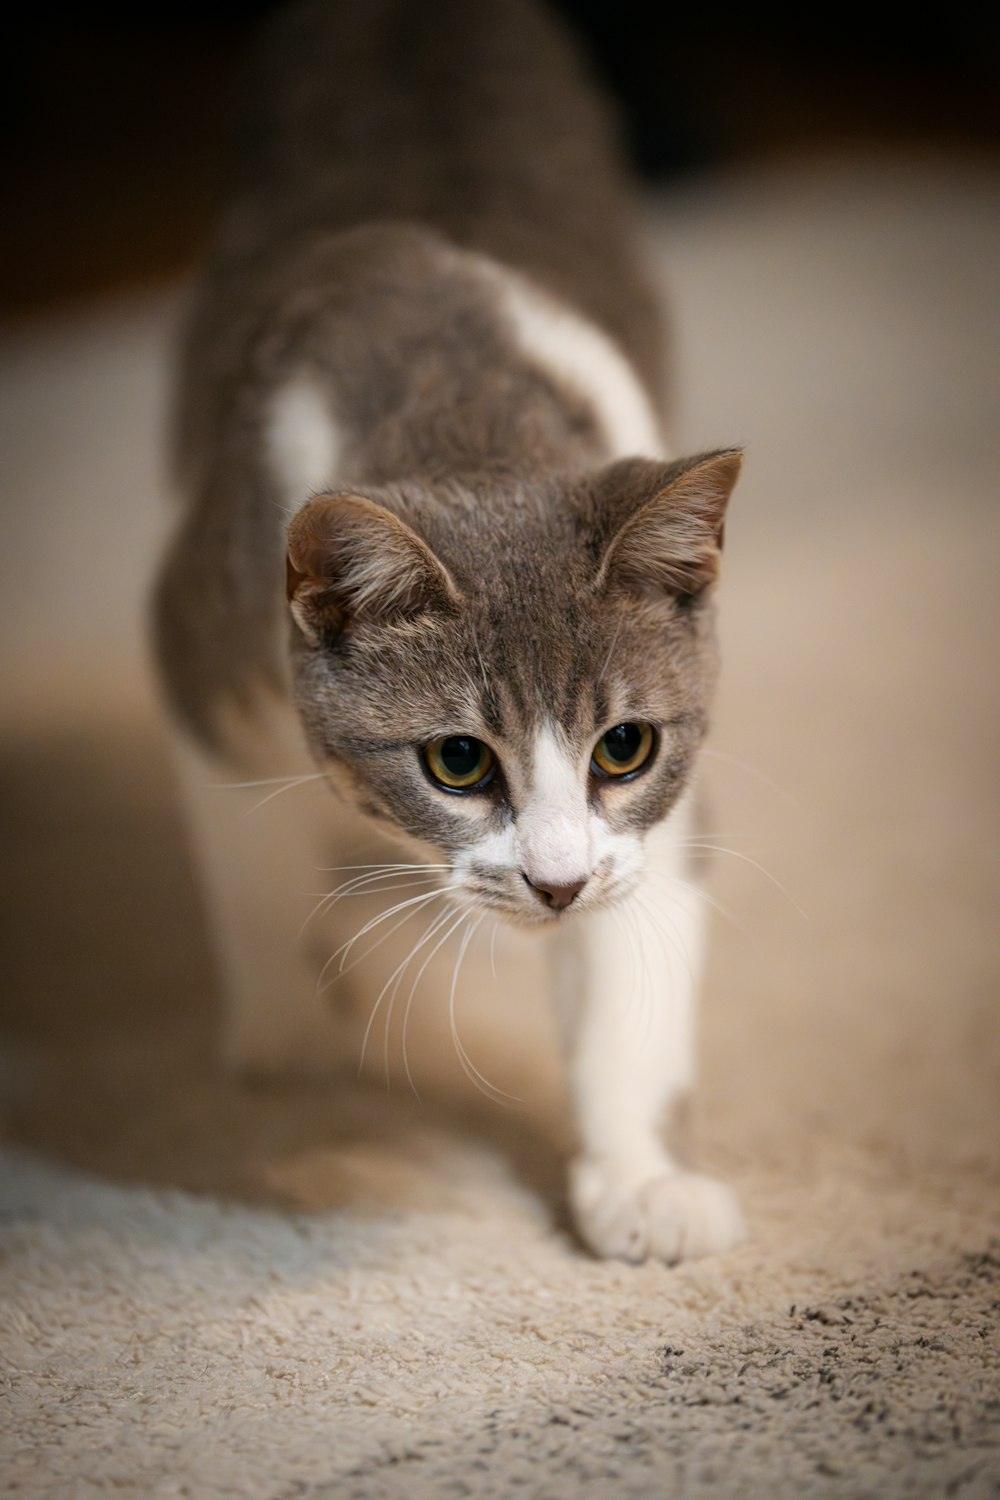 a gray and white cat walking across a carpet